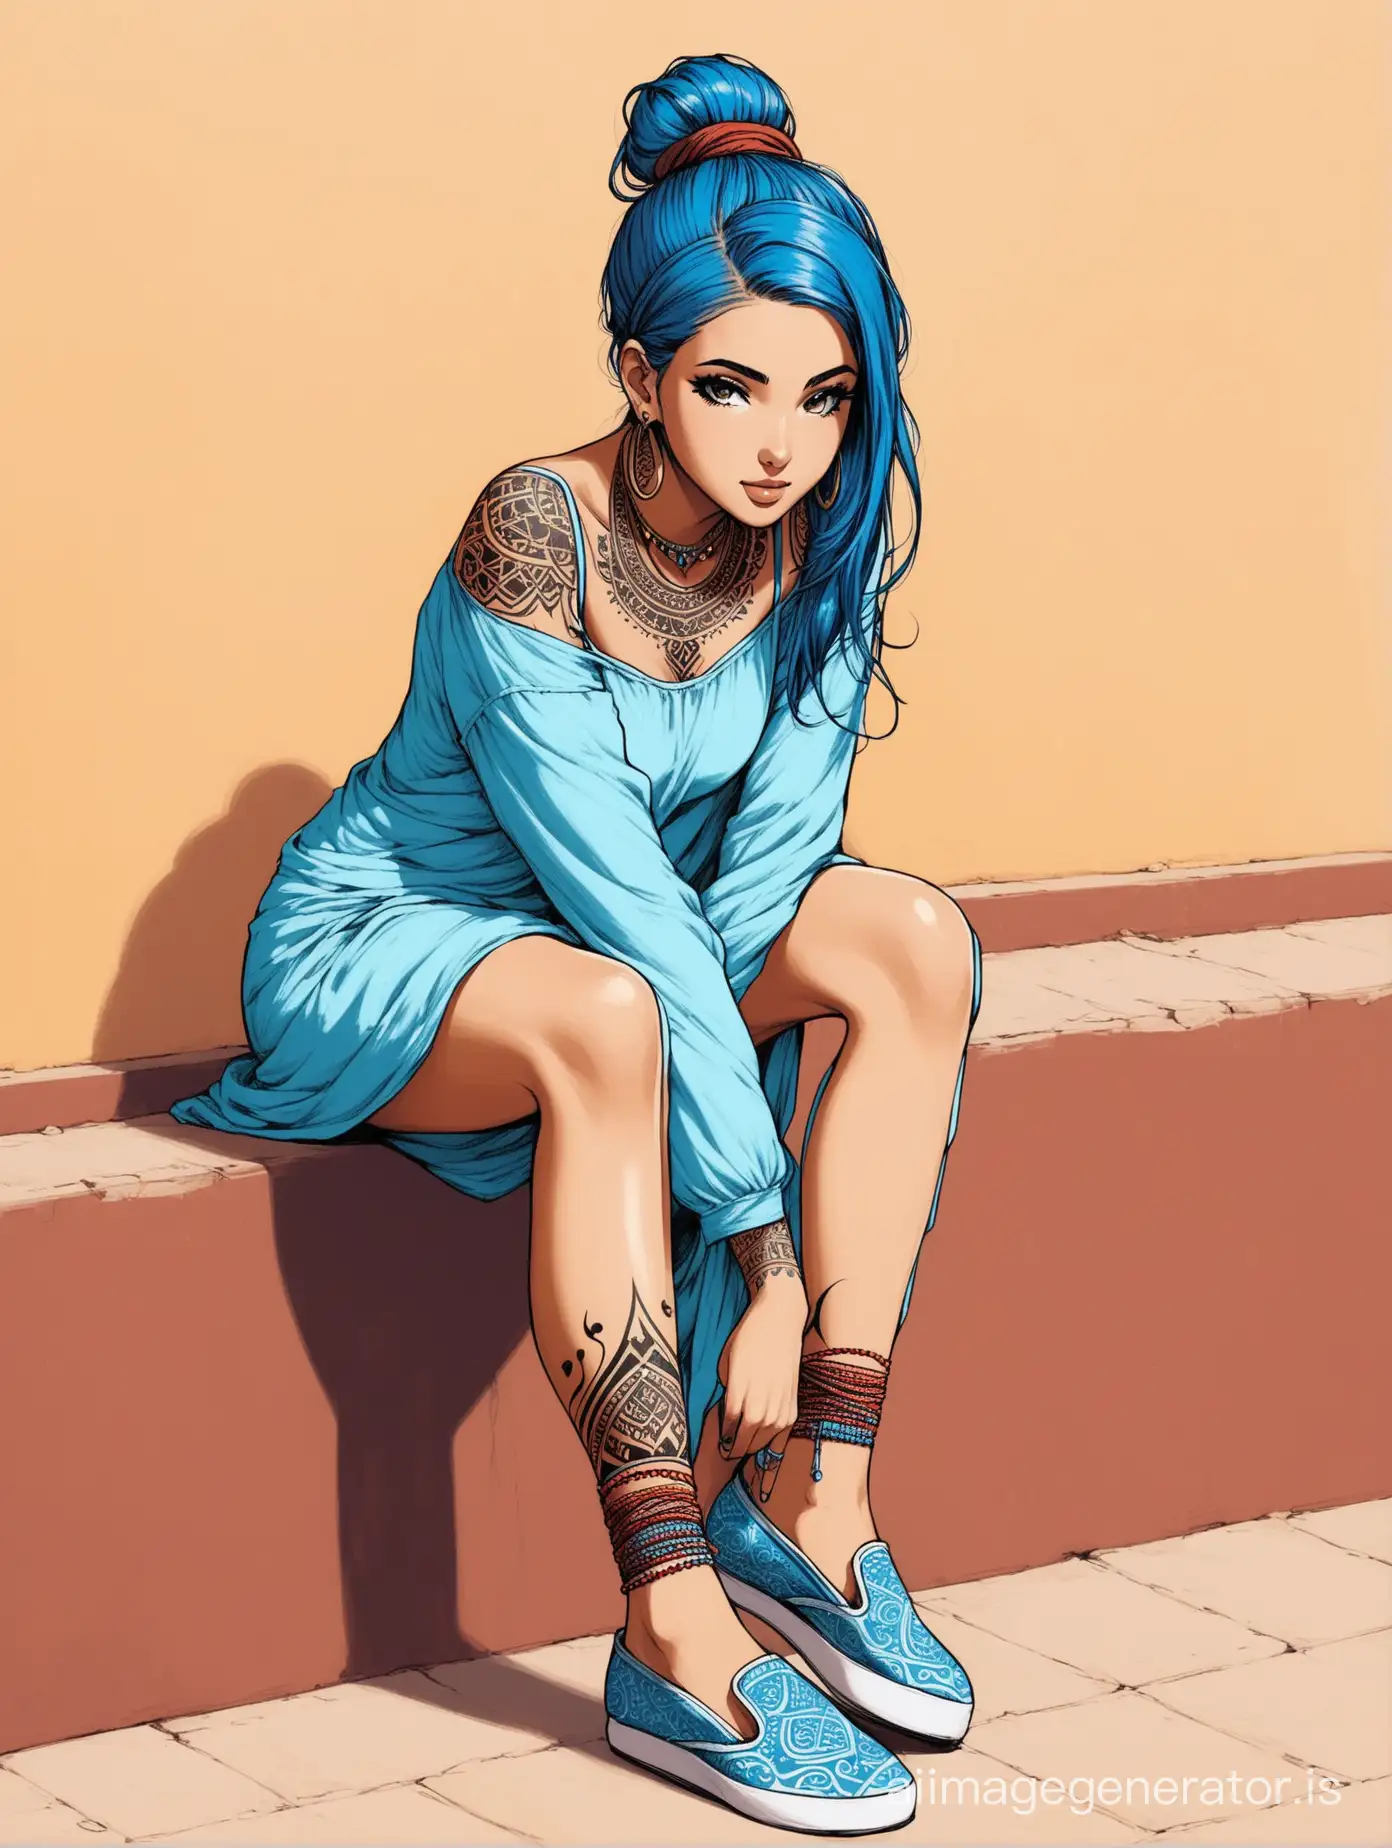 Gipsy girl with blue hair, hair tied, Arabian tattoo, wearing slip-ons pumps shoes